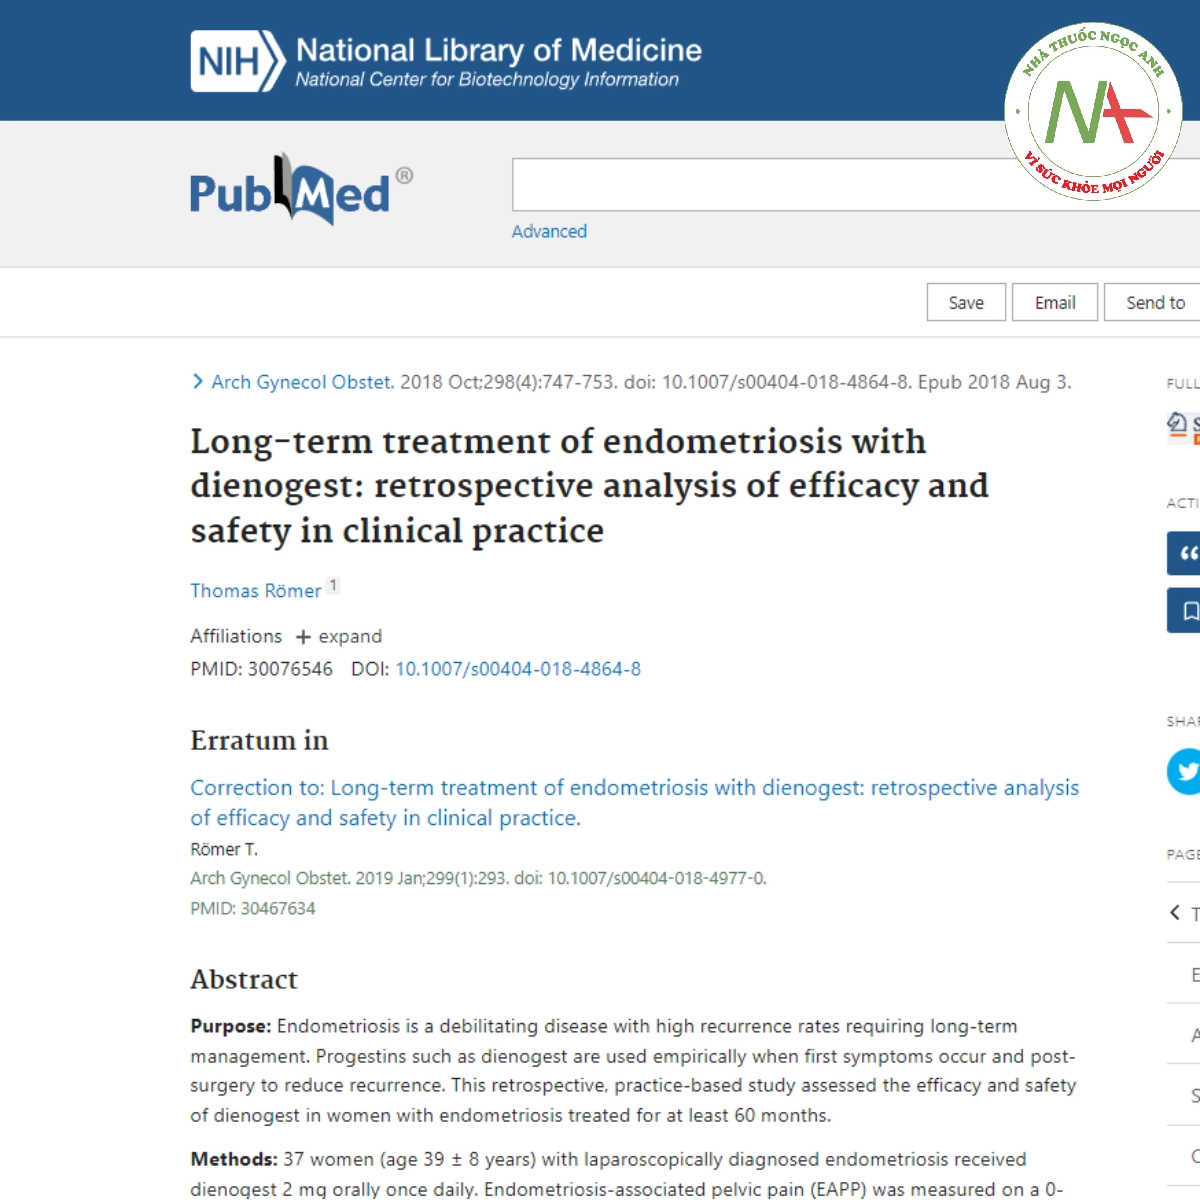 Long-term treatment of endometriosis with dienogest_ retrospective analysis of efficacy and safety in clinical practice